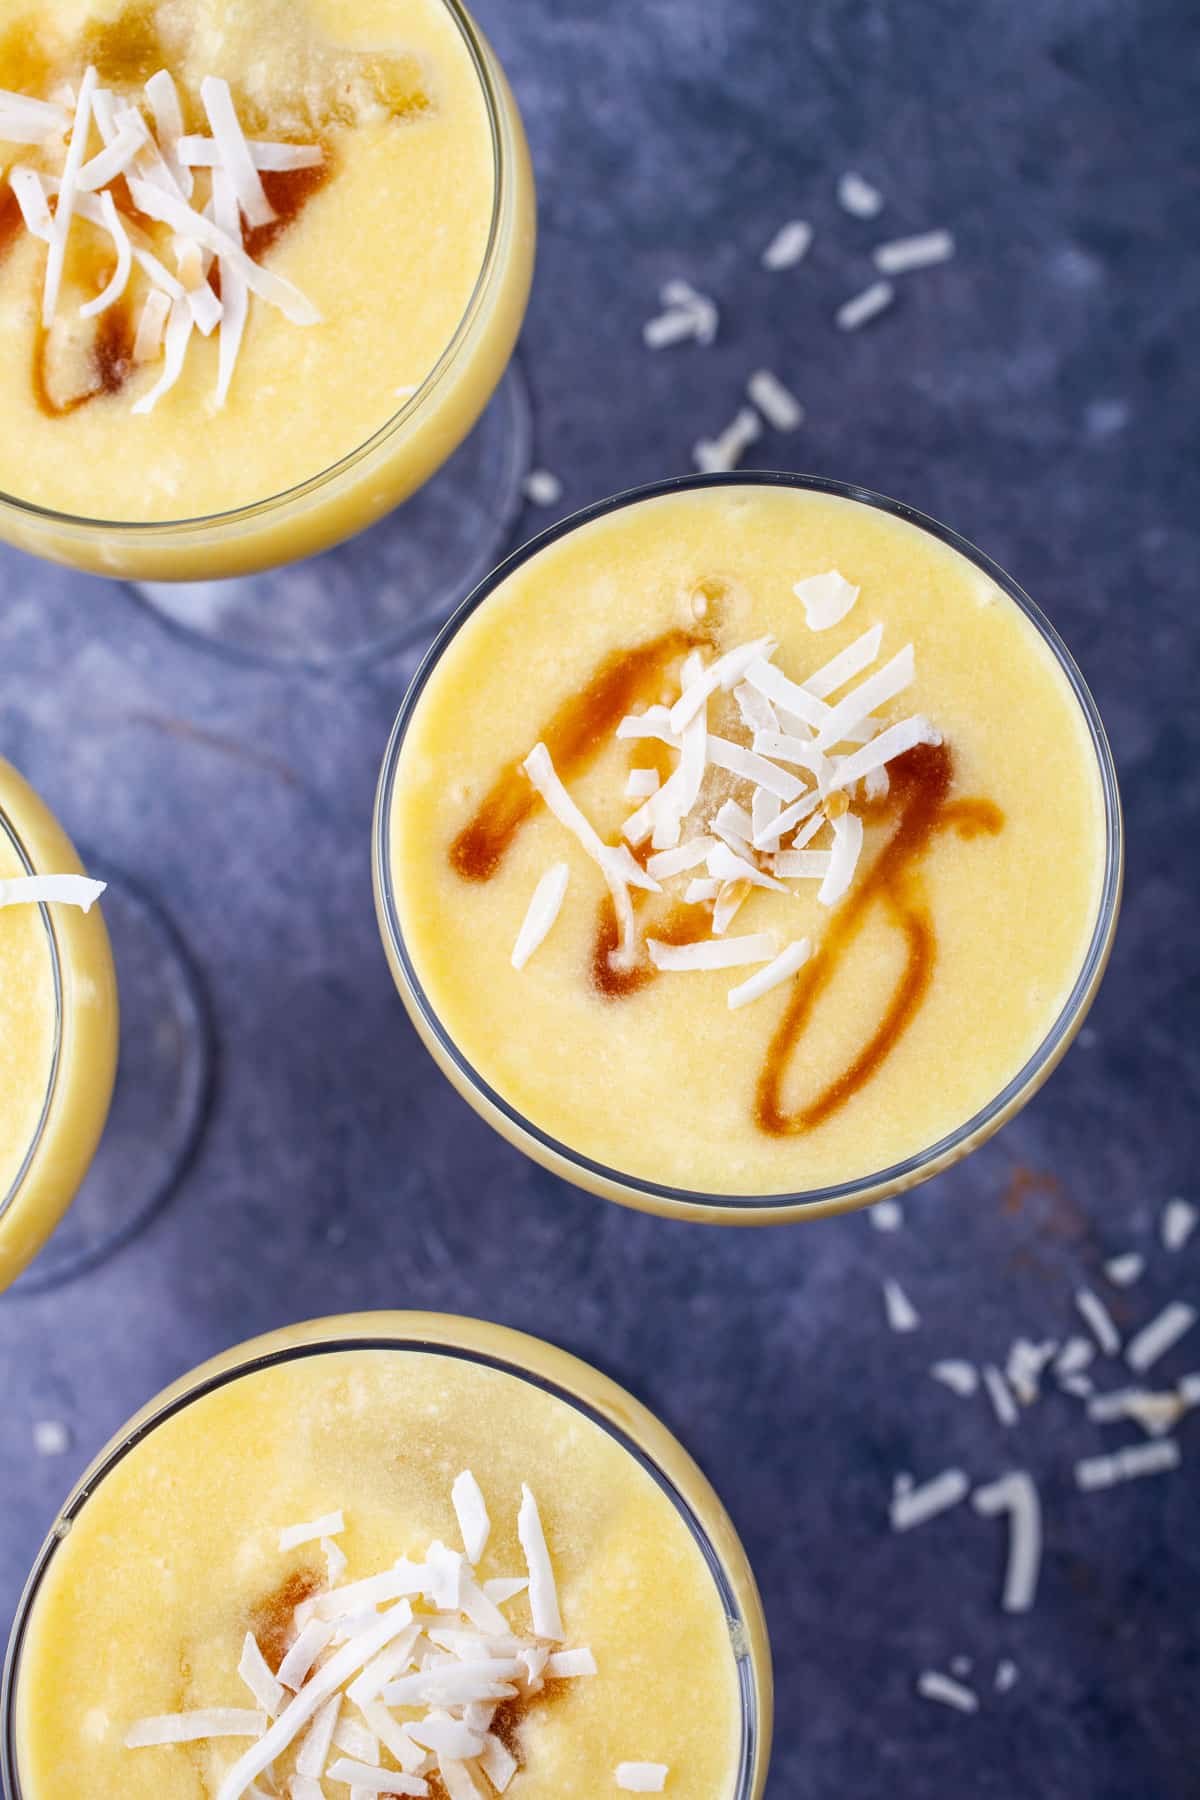 Pina colada non alcoholic drinks garnished with coconut shreds and a drizzle of maple syrup.